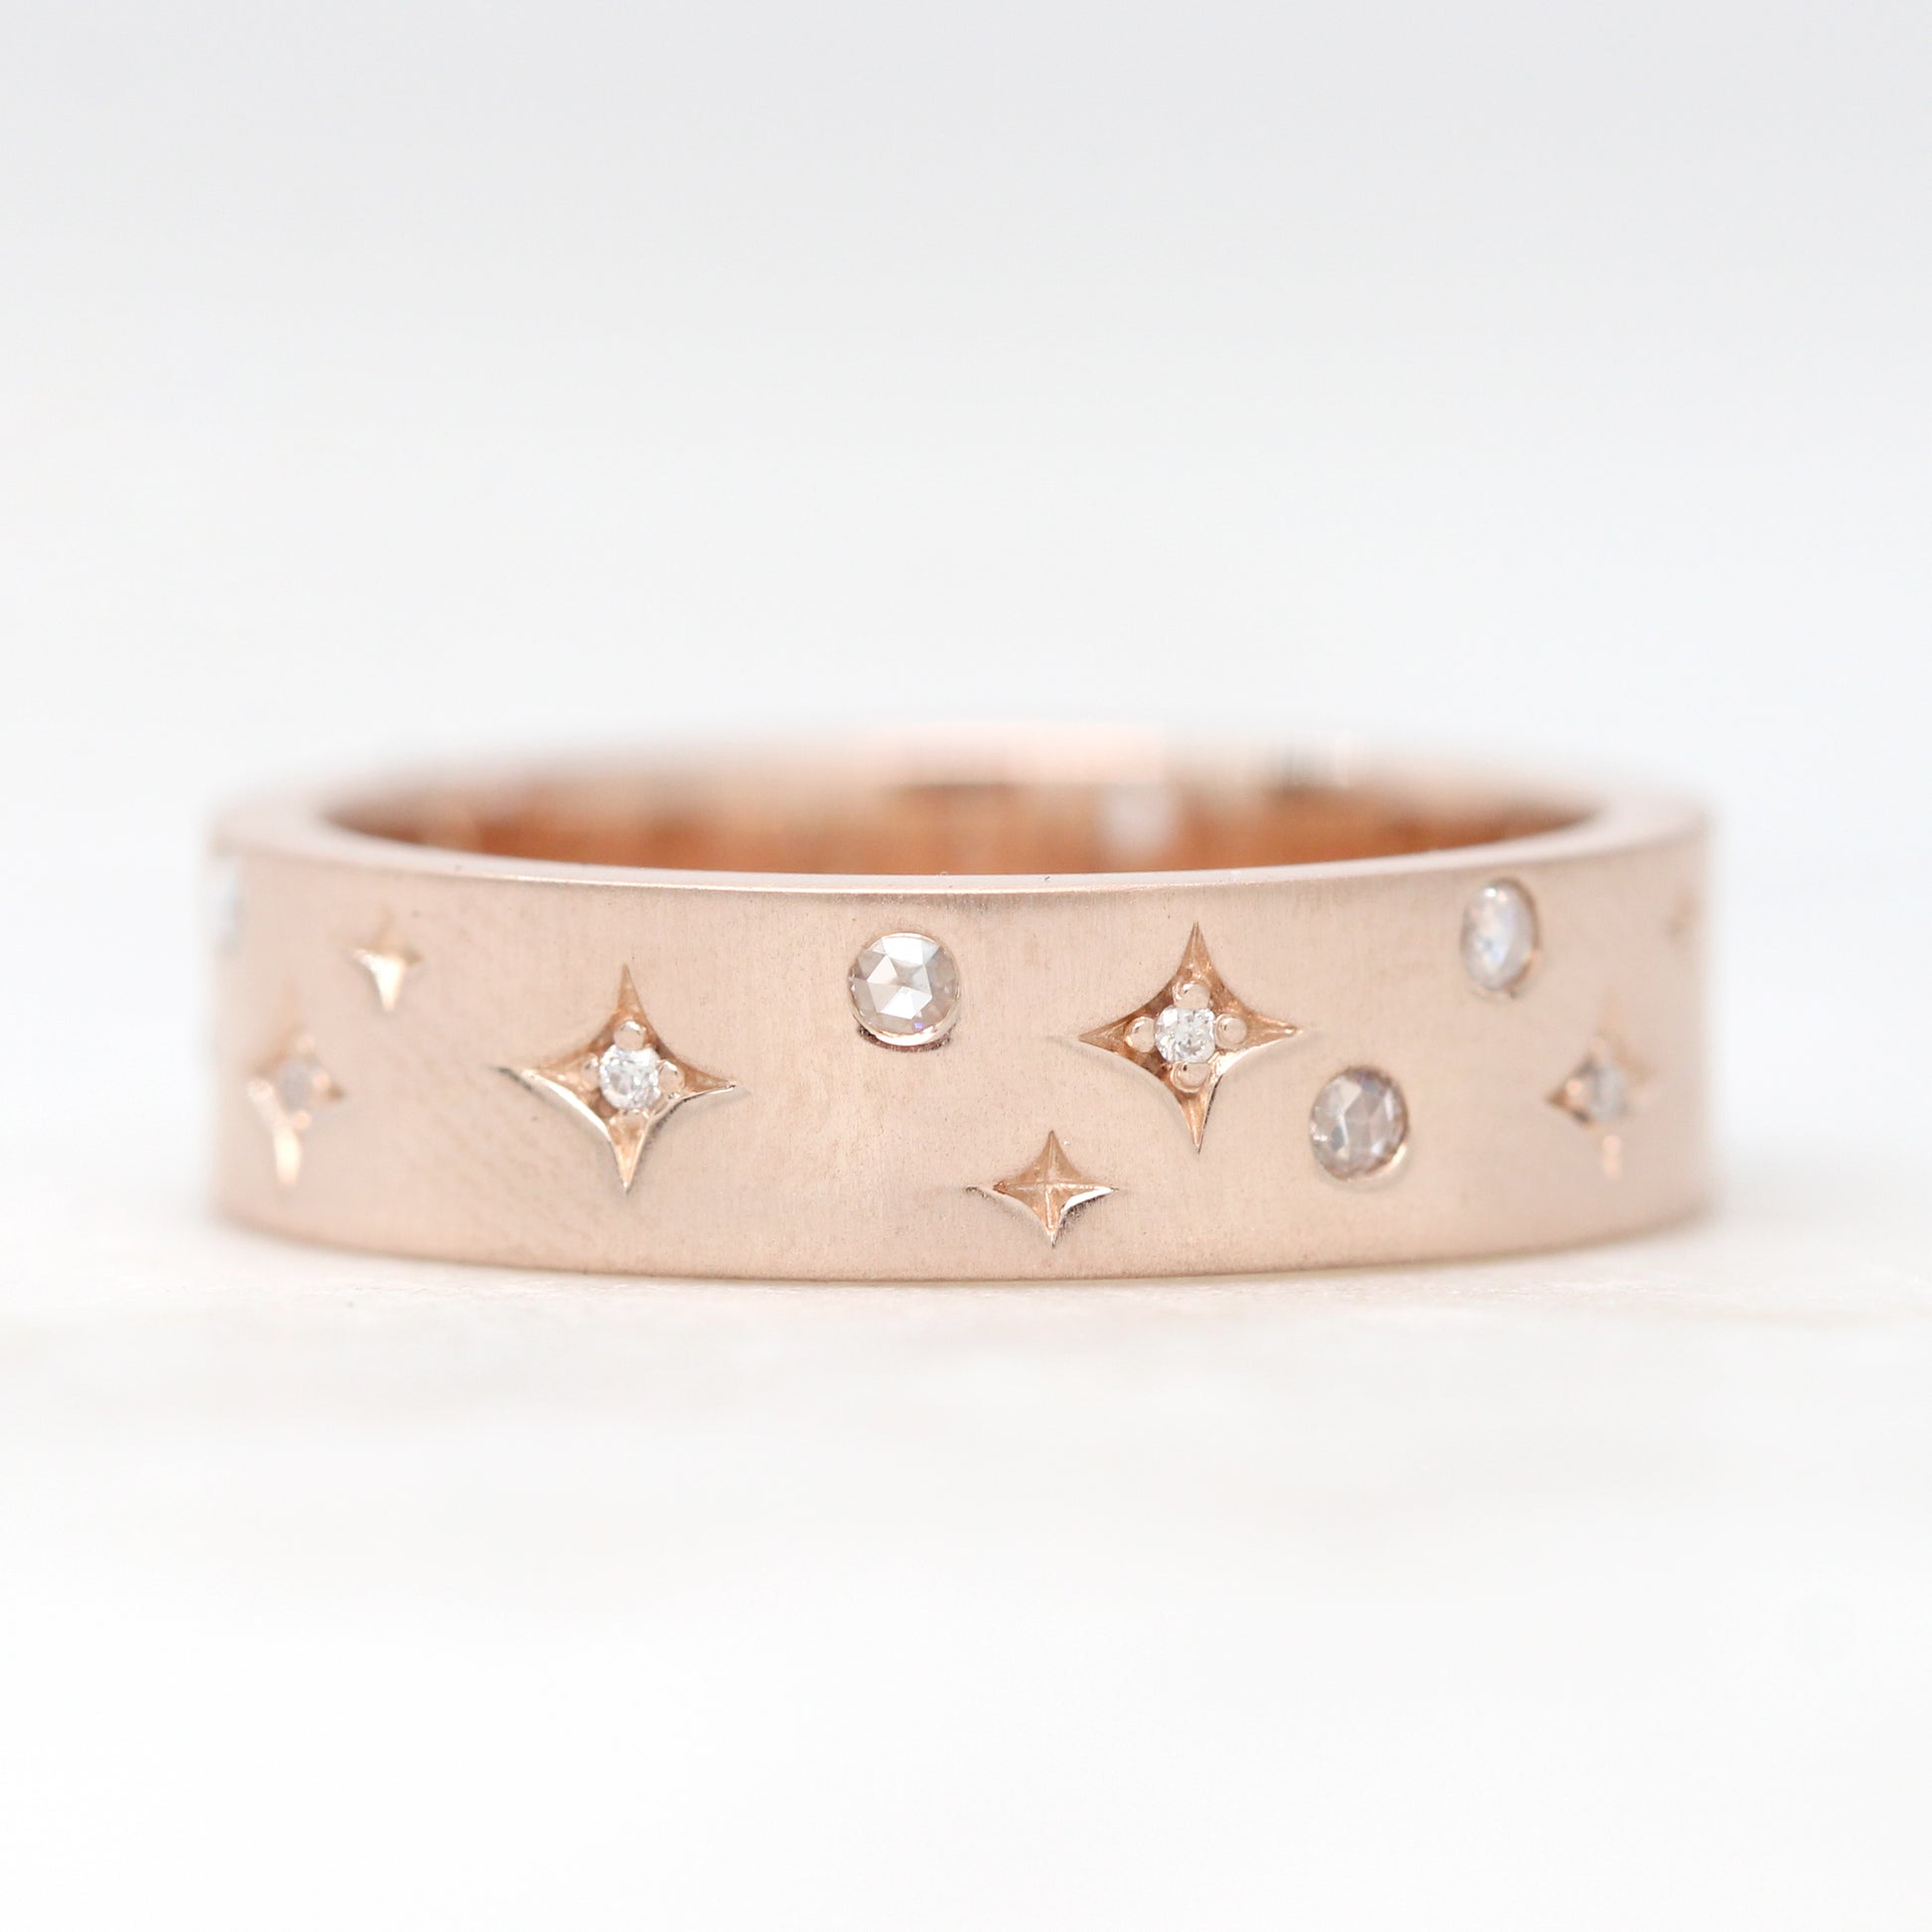 Constellation Star Cut Band - Unisex diamond antique inspired ring - Made to Order, Choose Your Gold Tone - Midwinter Co. Alternative Bridal Rings and Modern Fine Jewelry